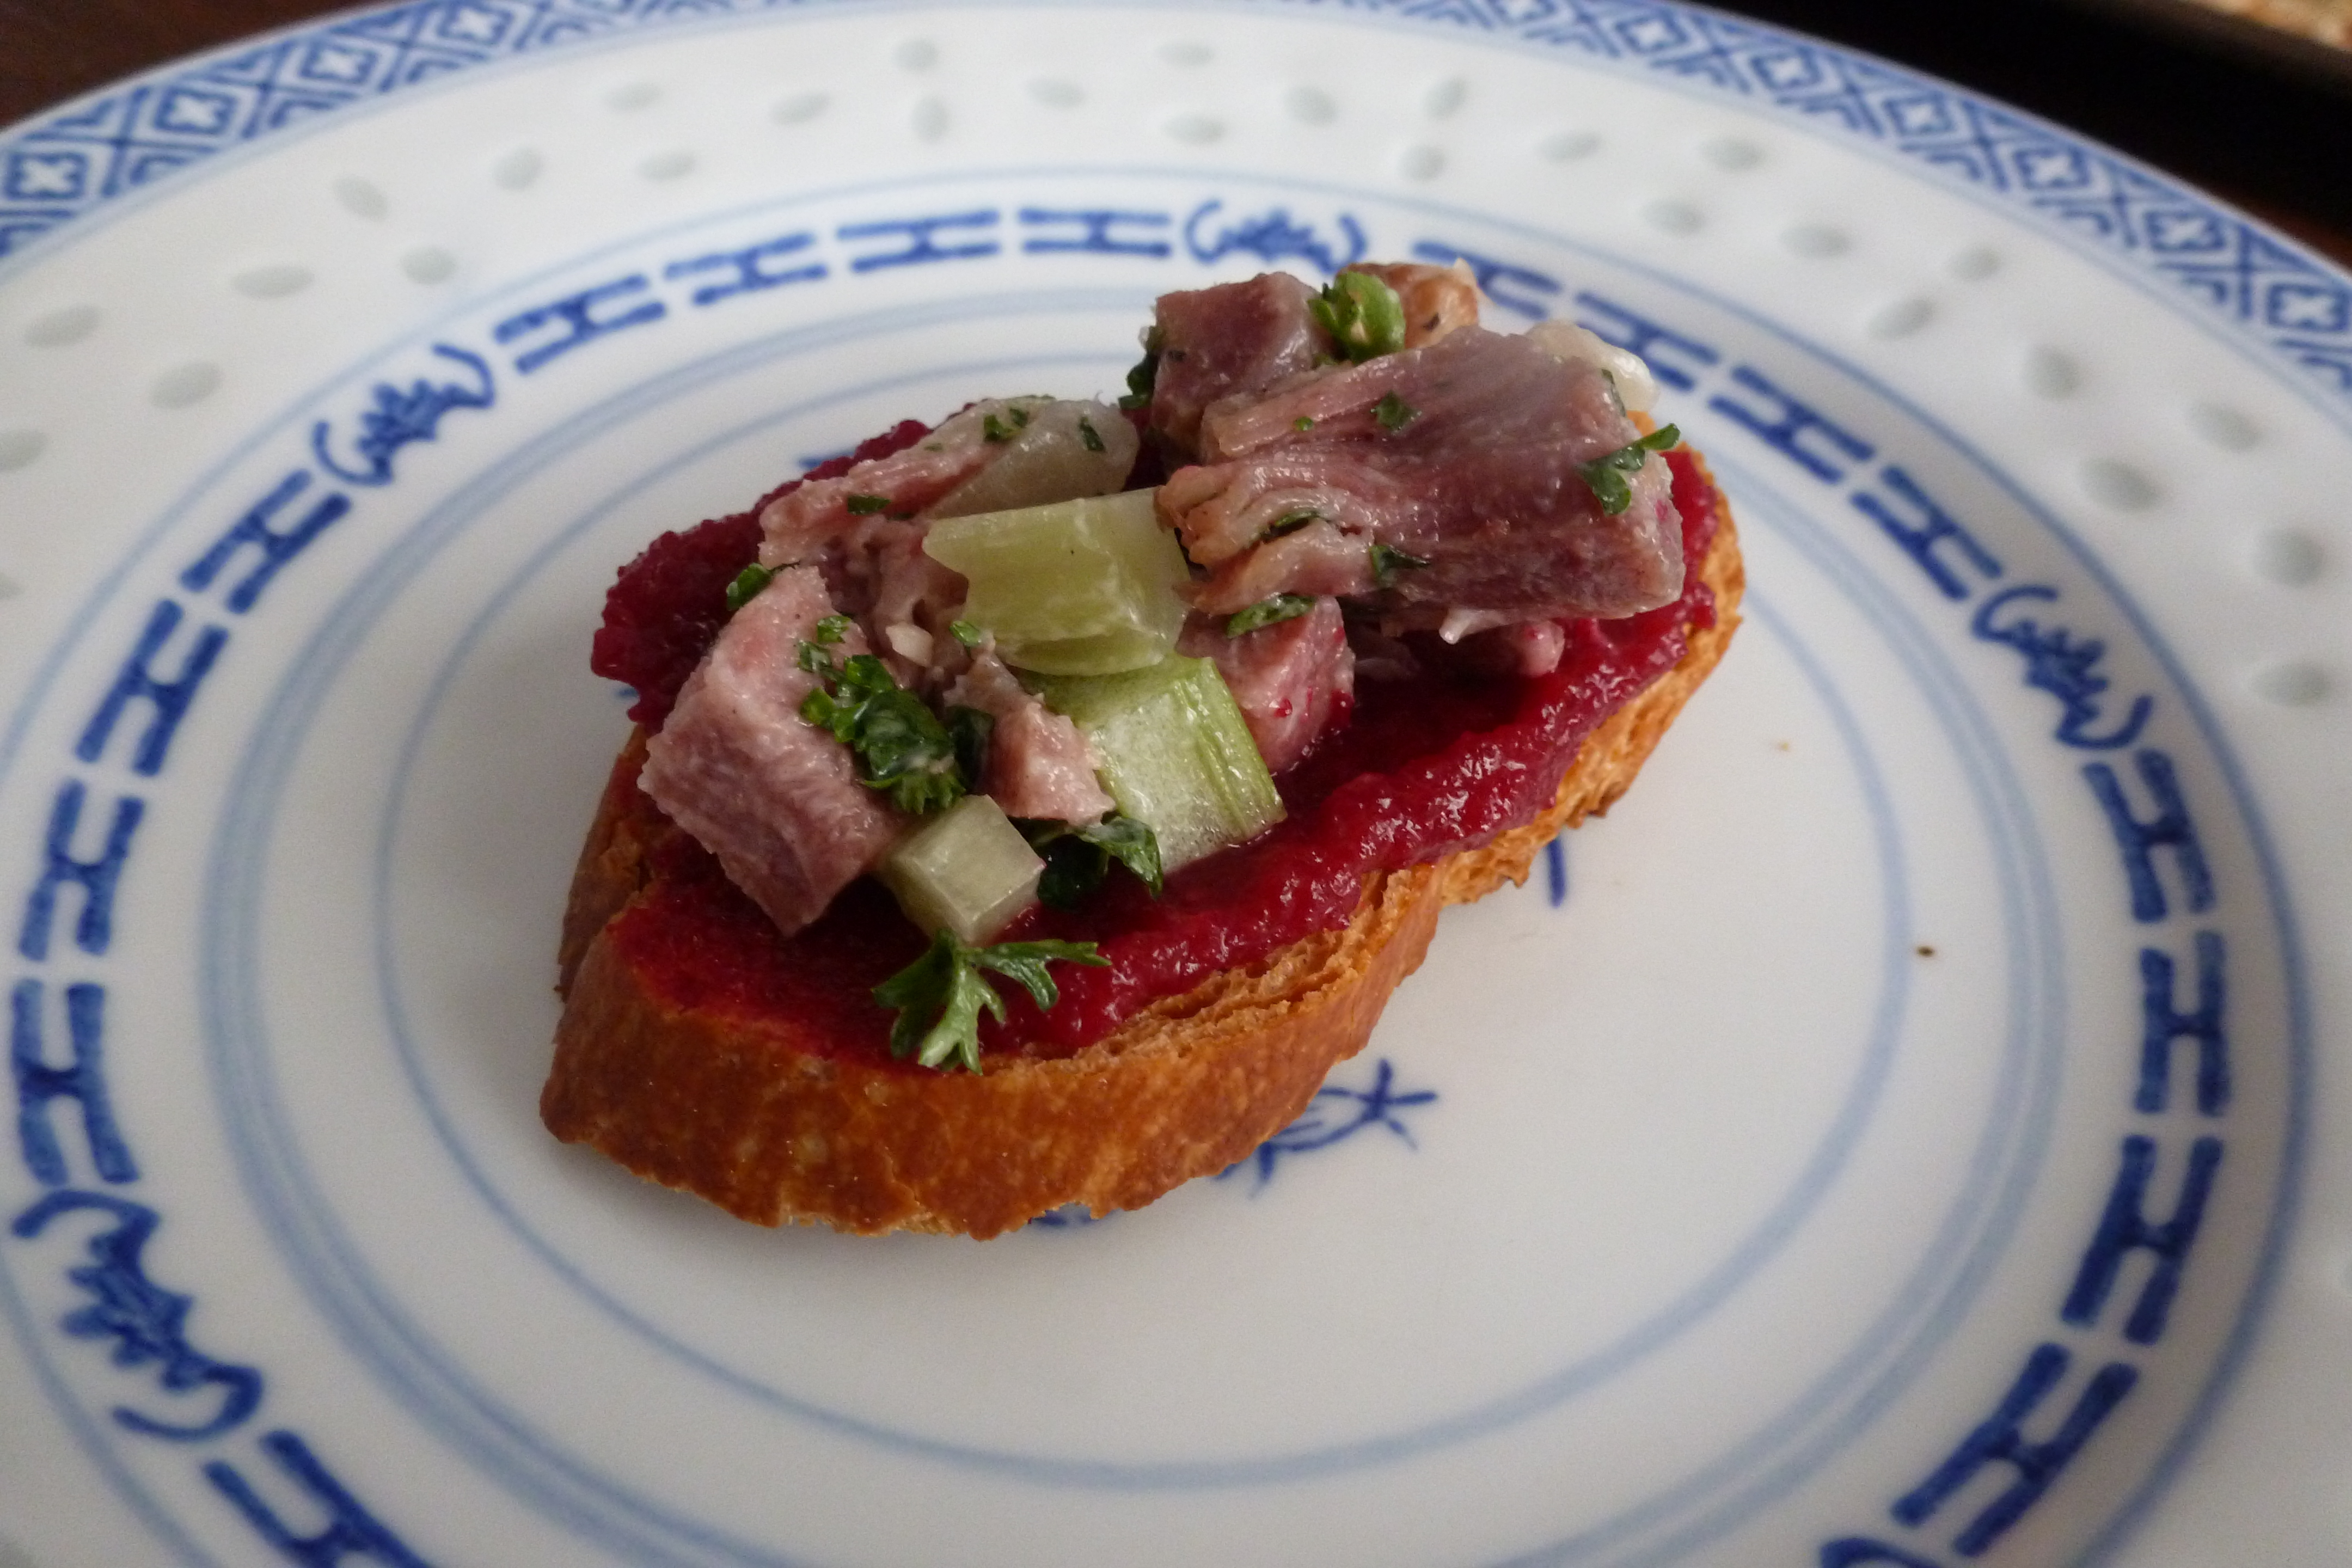 Chopped tongue on toast with beet ketchup